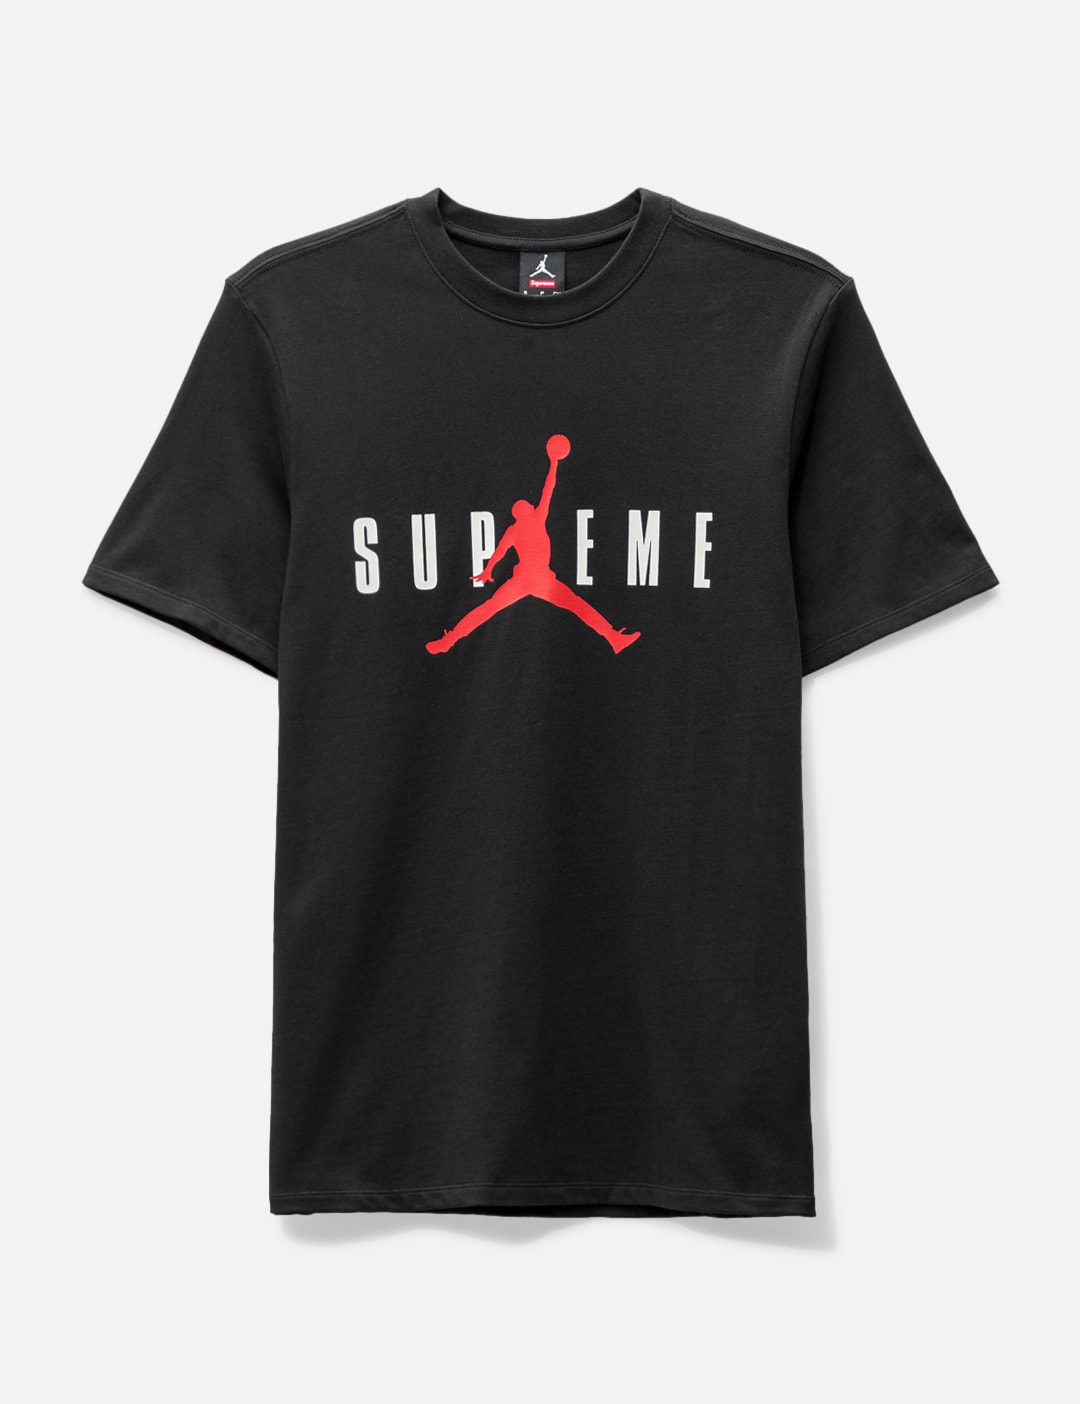 Jordan Brand - Supreme X Tee | HBX - Globally Curated Fashion and Lifestyle by